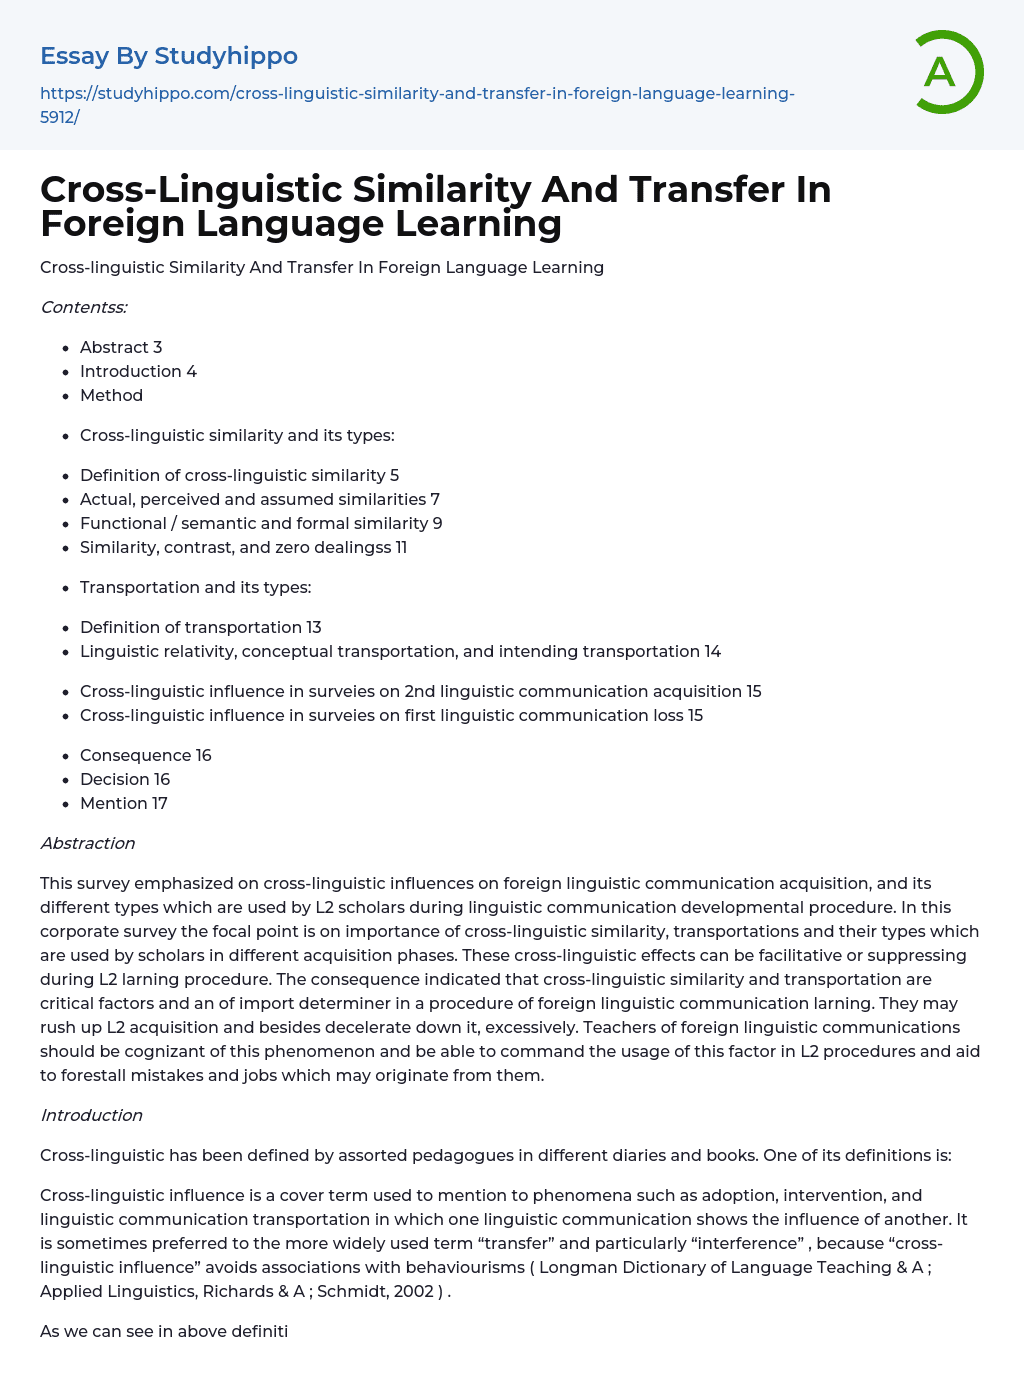 Cross-Linguistic Similarity And Transfer In Foreign Language Learning